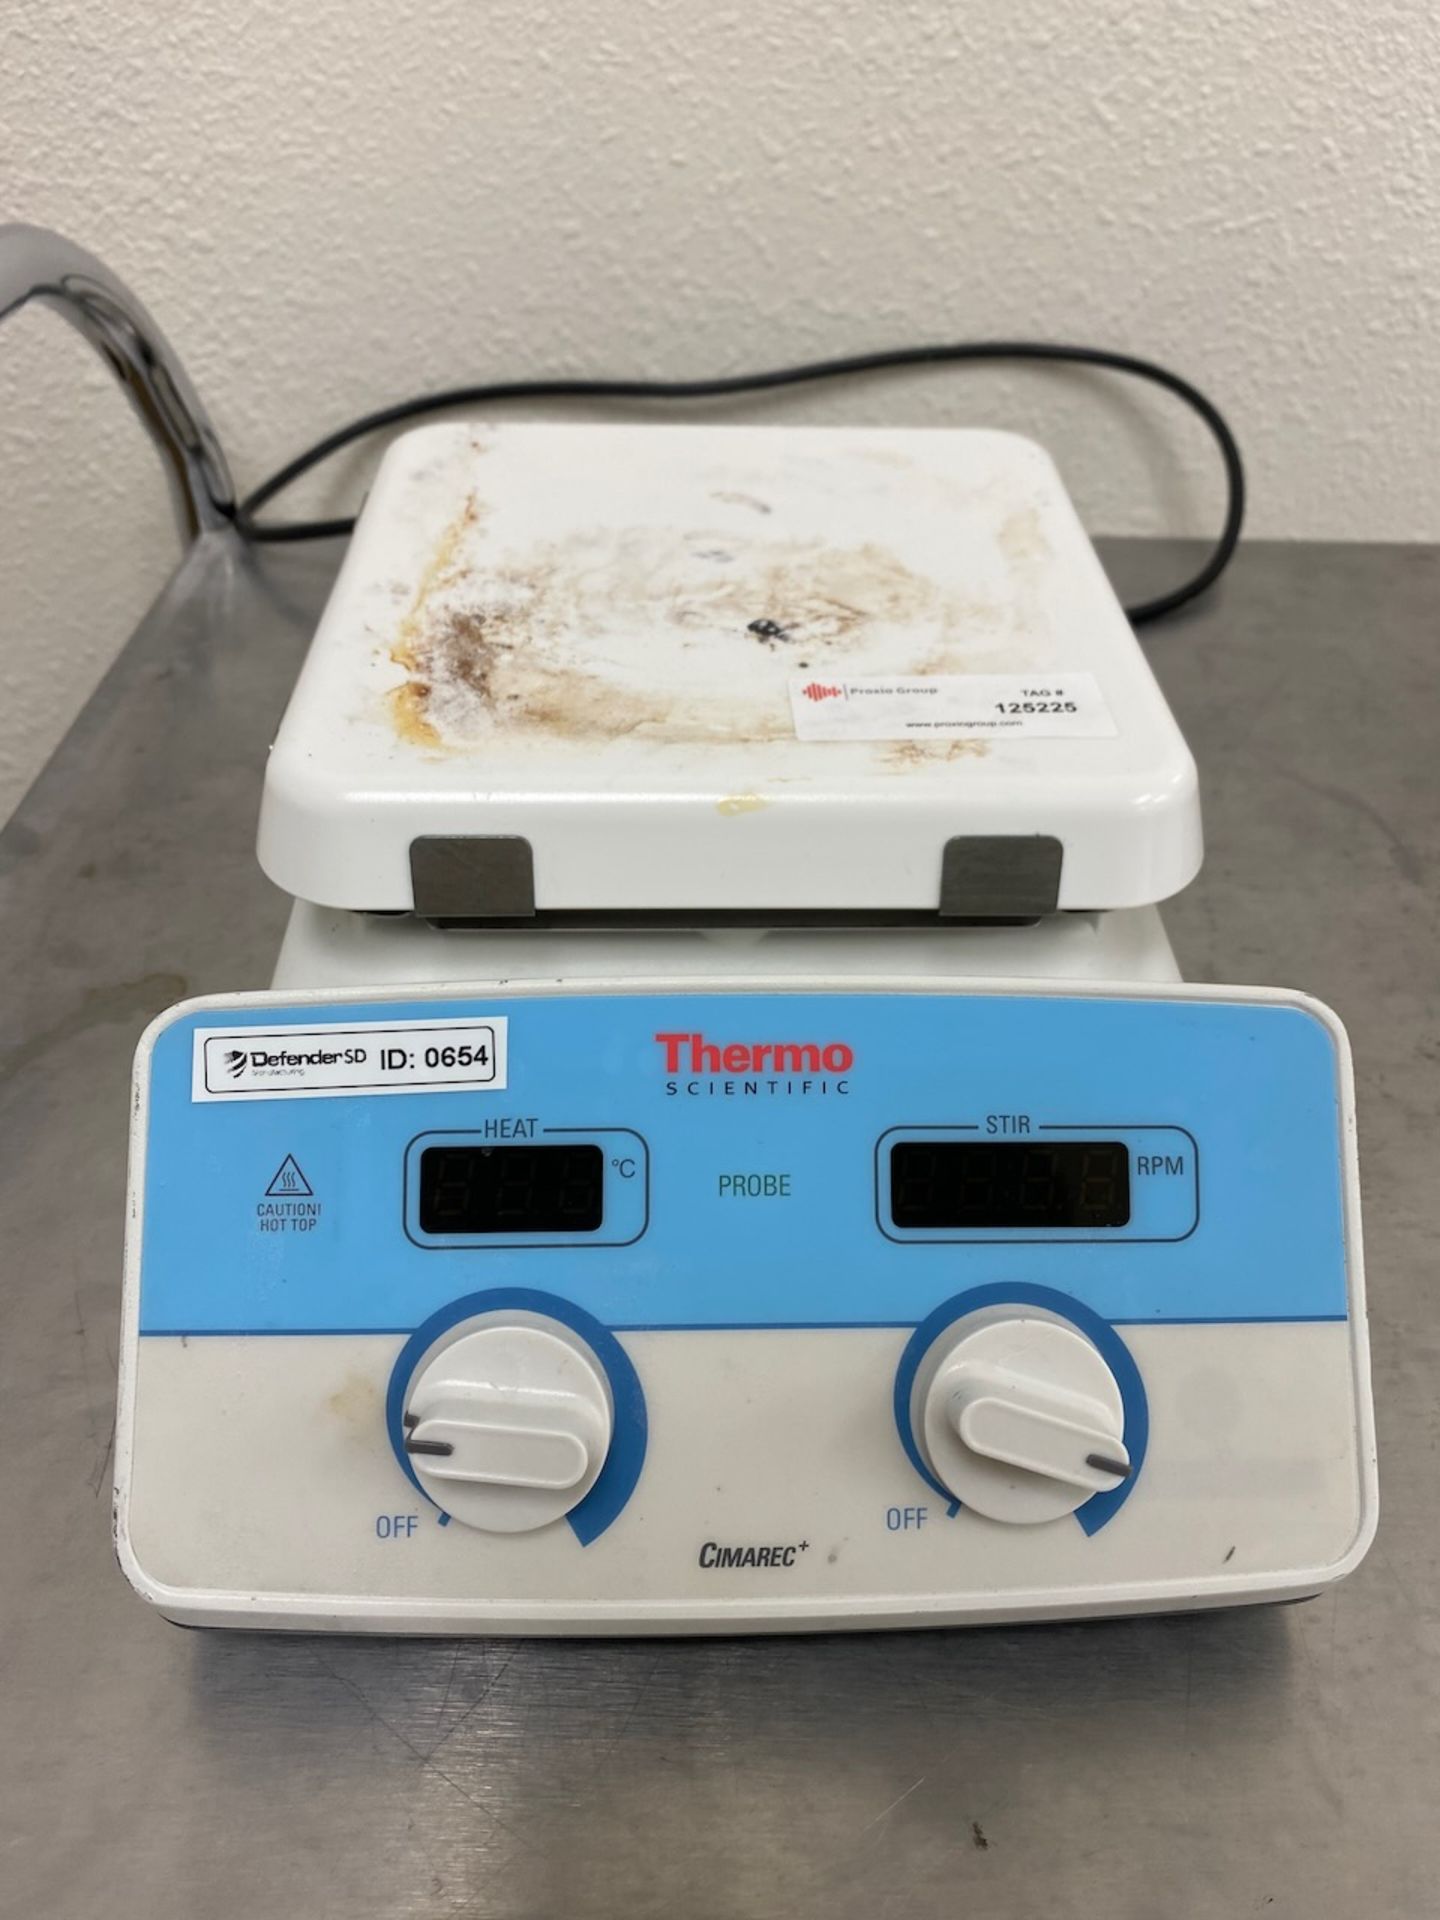 Thermo Scientific heat and stir plate